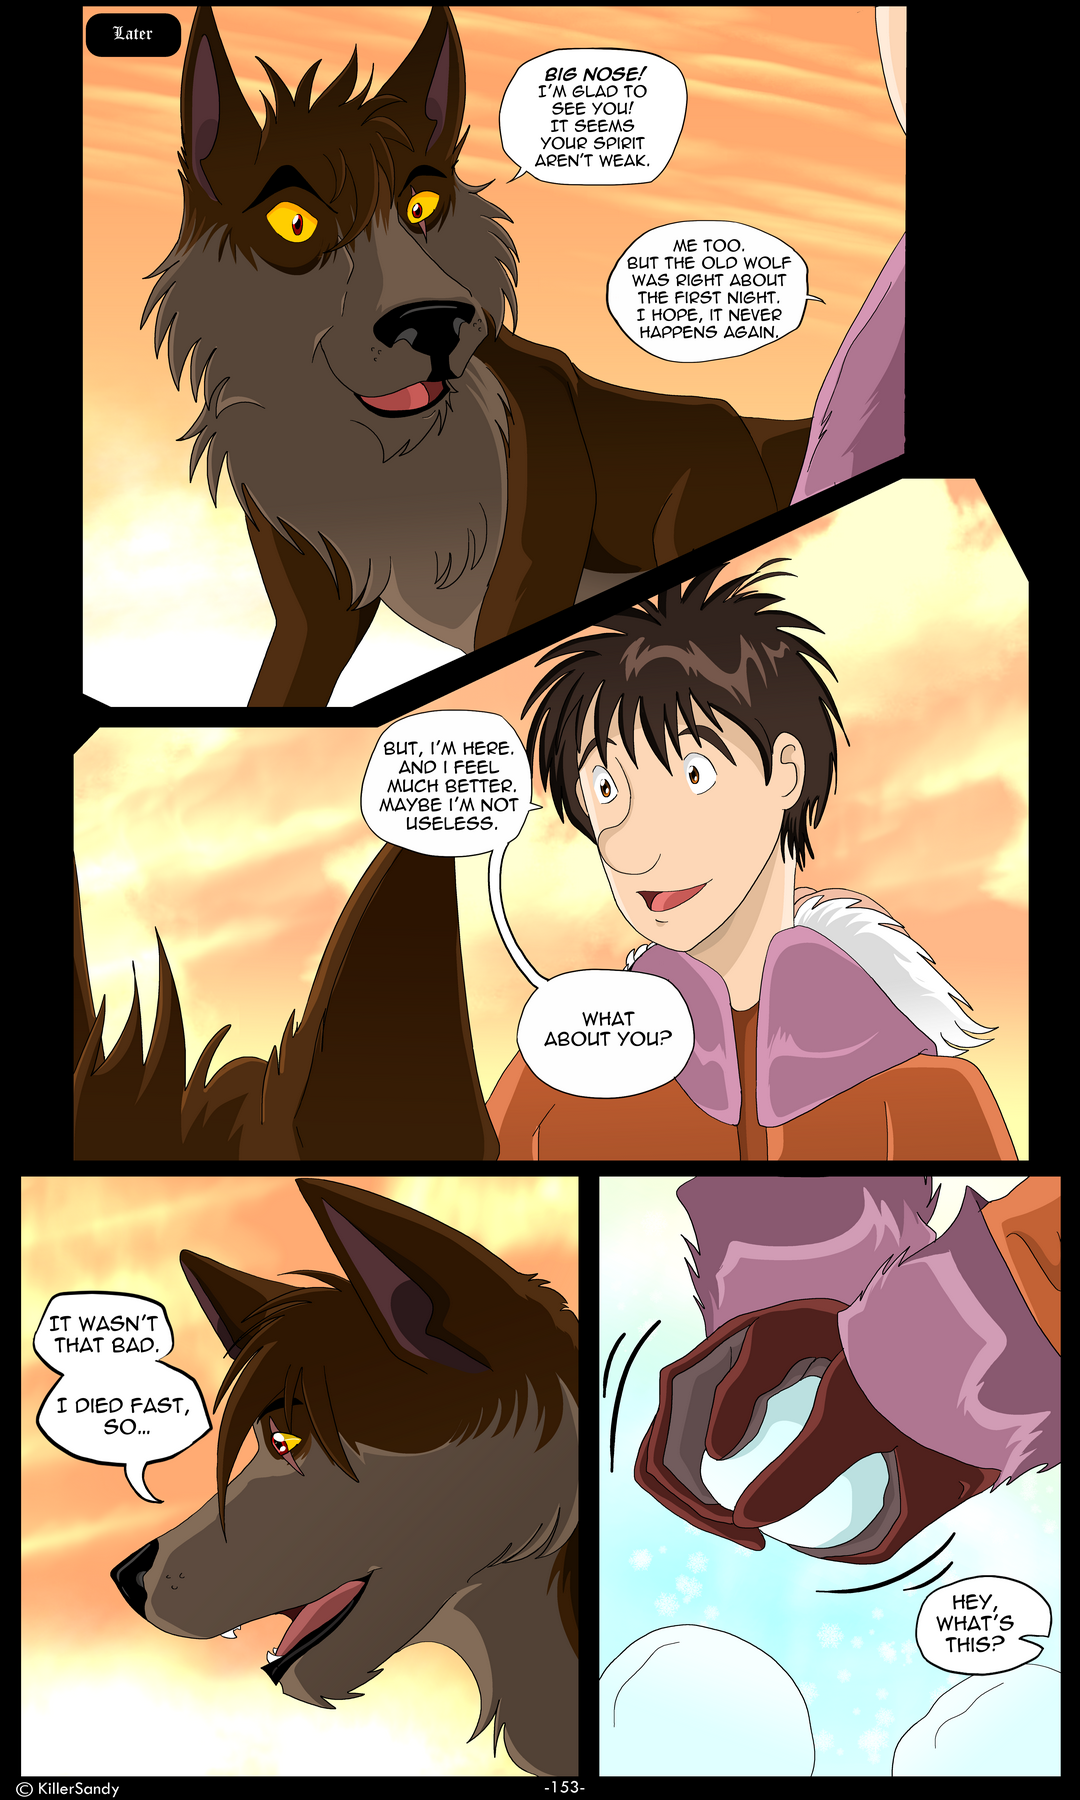 The Prince of the Moonlight Stone page 153